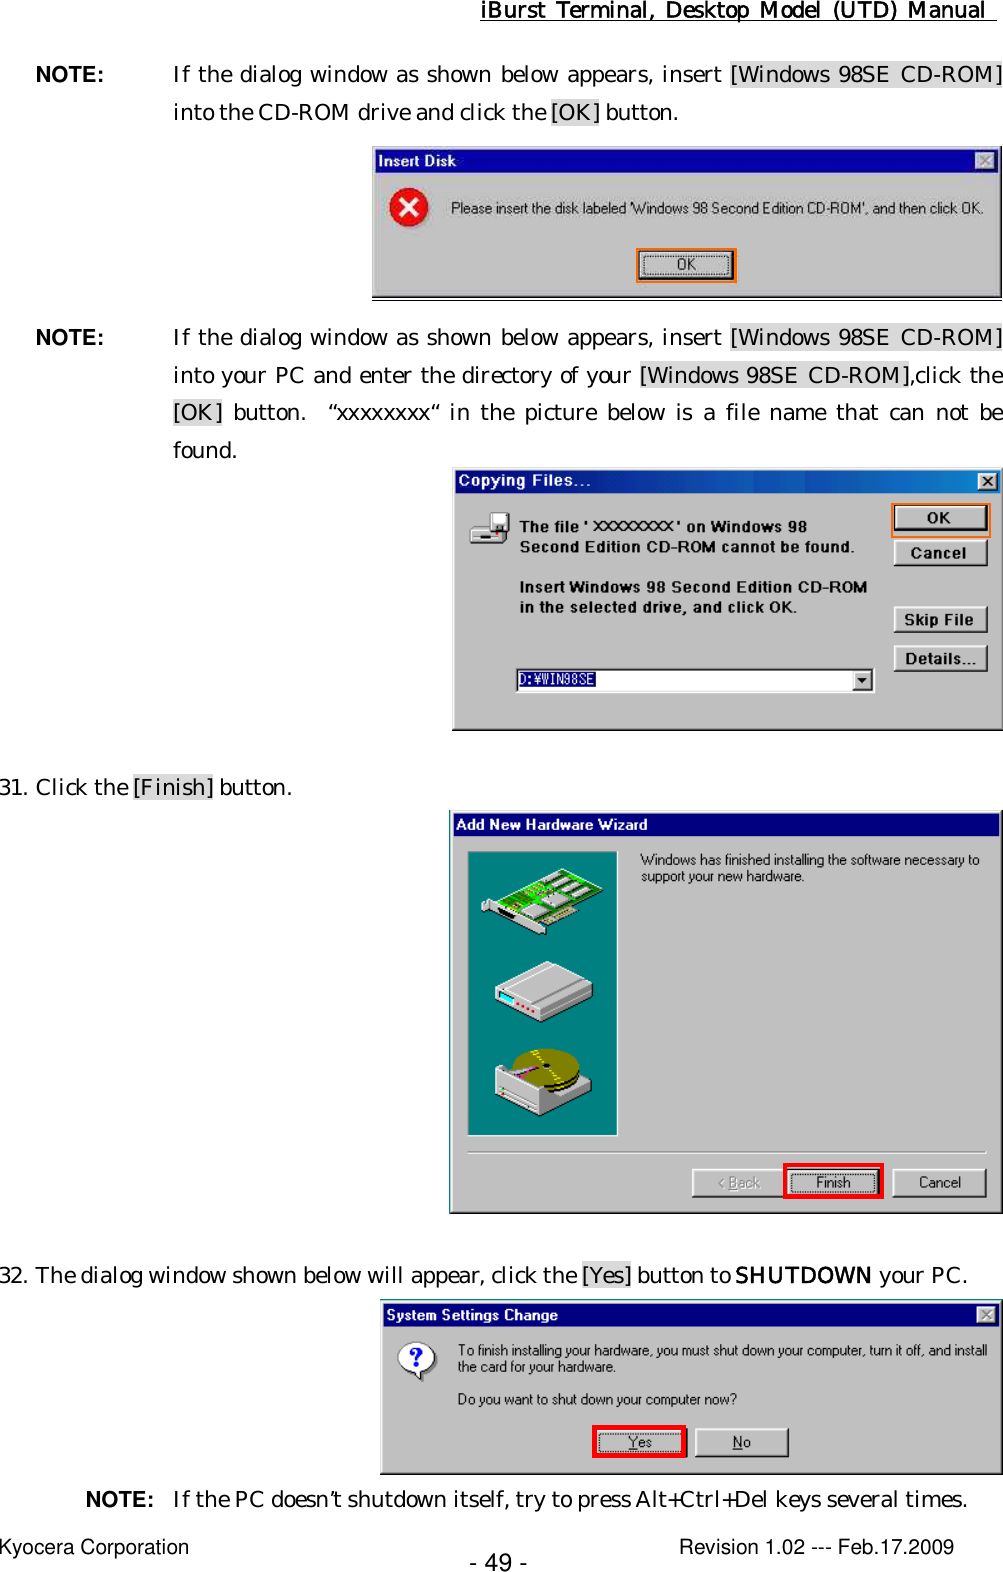 iBurst  Terminal, Desktop  Model  (UTD)  Manual    Kyocera Corporation                                                                                              Revision 1.02 --- Feb.17.2009 - 49 - NOTE:  If the dialog window as shown below appears, insert [Windows 98SE CD-ROM] into the CD-ROM drive and click the [OK] button.  NOTE:  If the dialog window as shown below appears, insert [Windows 98SE CD-ROM] into your PC and enter the directory of your [Windows 98SE CD-ROM],click the [OK]  button.   “xxxxxxxx“  in  the  picture  below  is a file name that can  not  be found.   31. Click the [Finish] button.   32. The dialog window shown below will appear, click the [Yes] button to SHUTDOWN your PC.  NOTE:  If the PC doesn’t shutdown itself, try to press Alt+Ctrl+Del keys several times. 